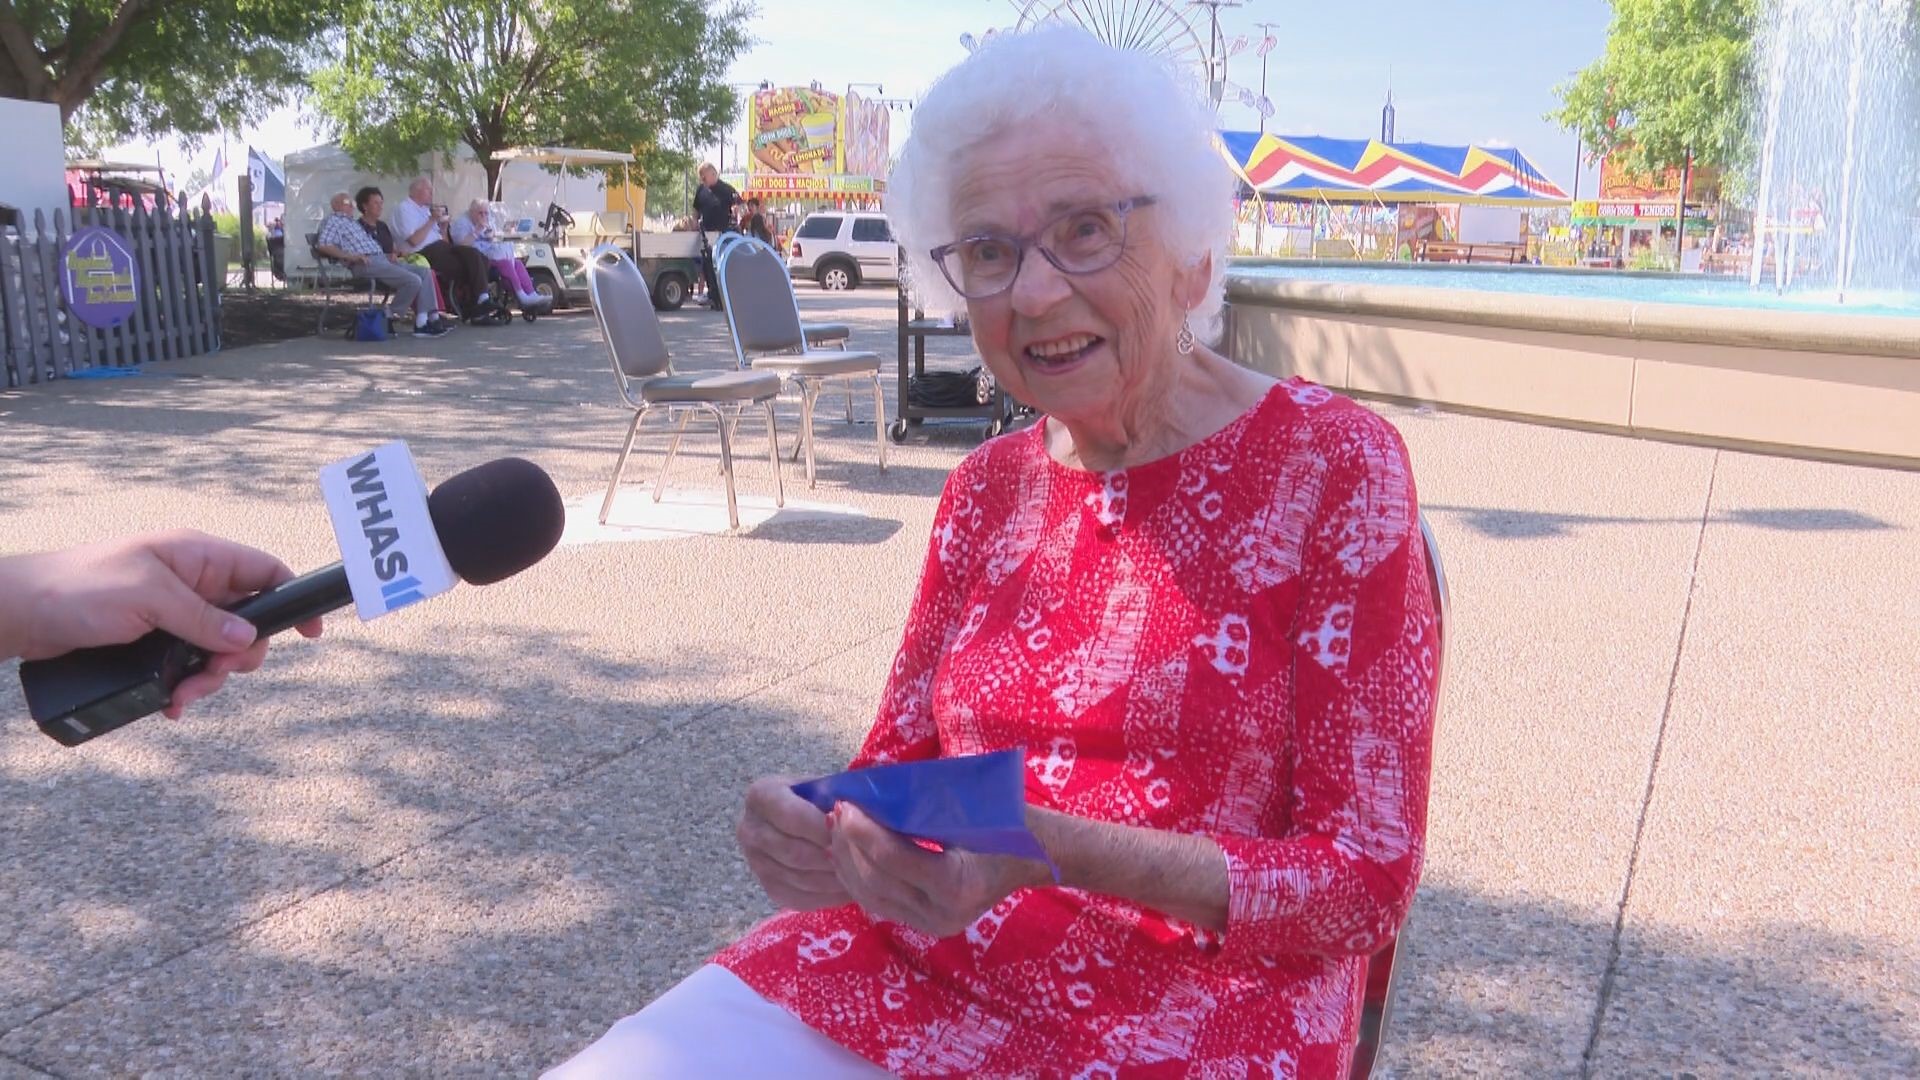 One of our favorite times at the KY State Fair in 2023 was interviewing 103-year-old Holly Collins who cut the ribbon, officially opening the fair.